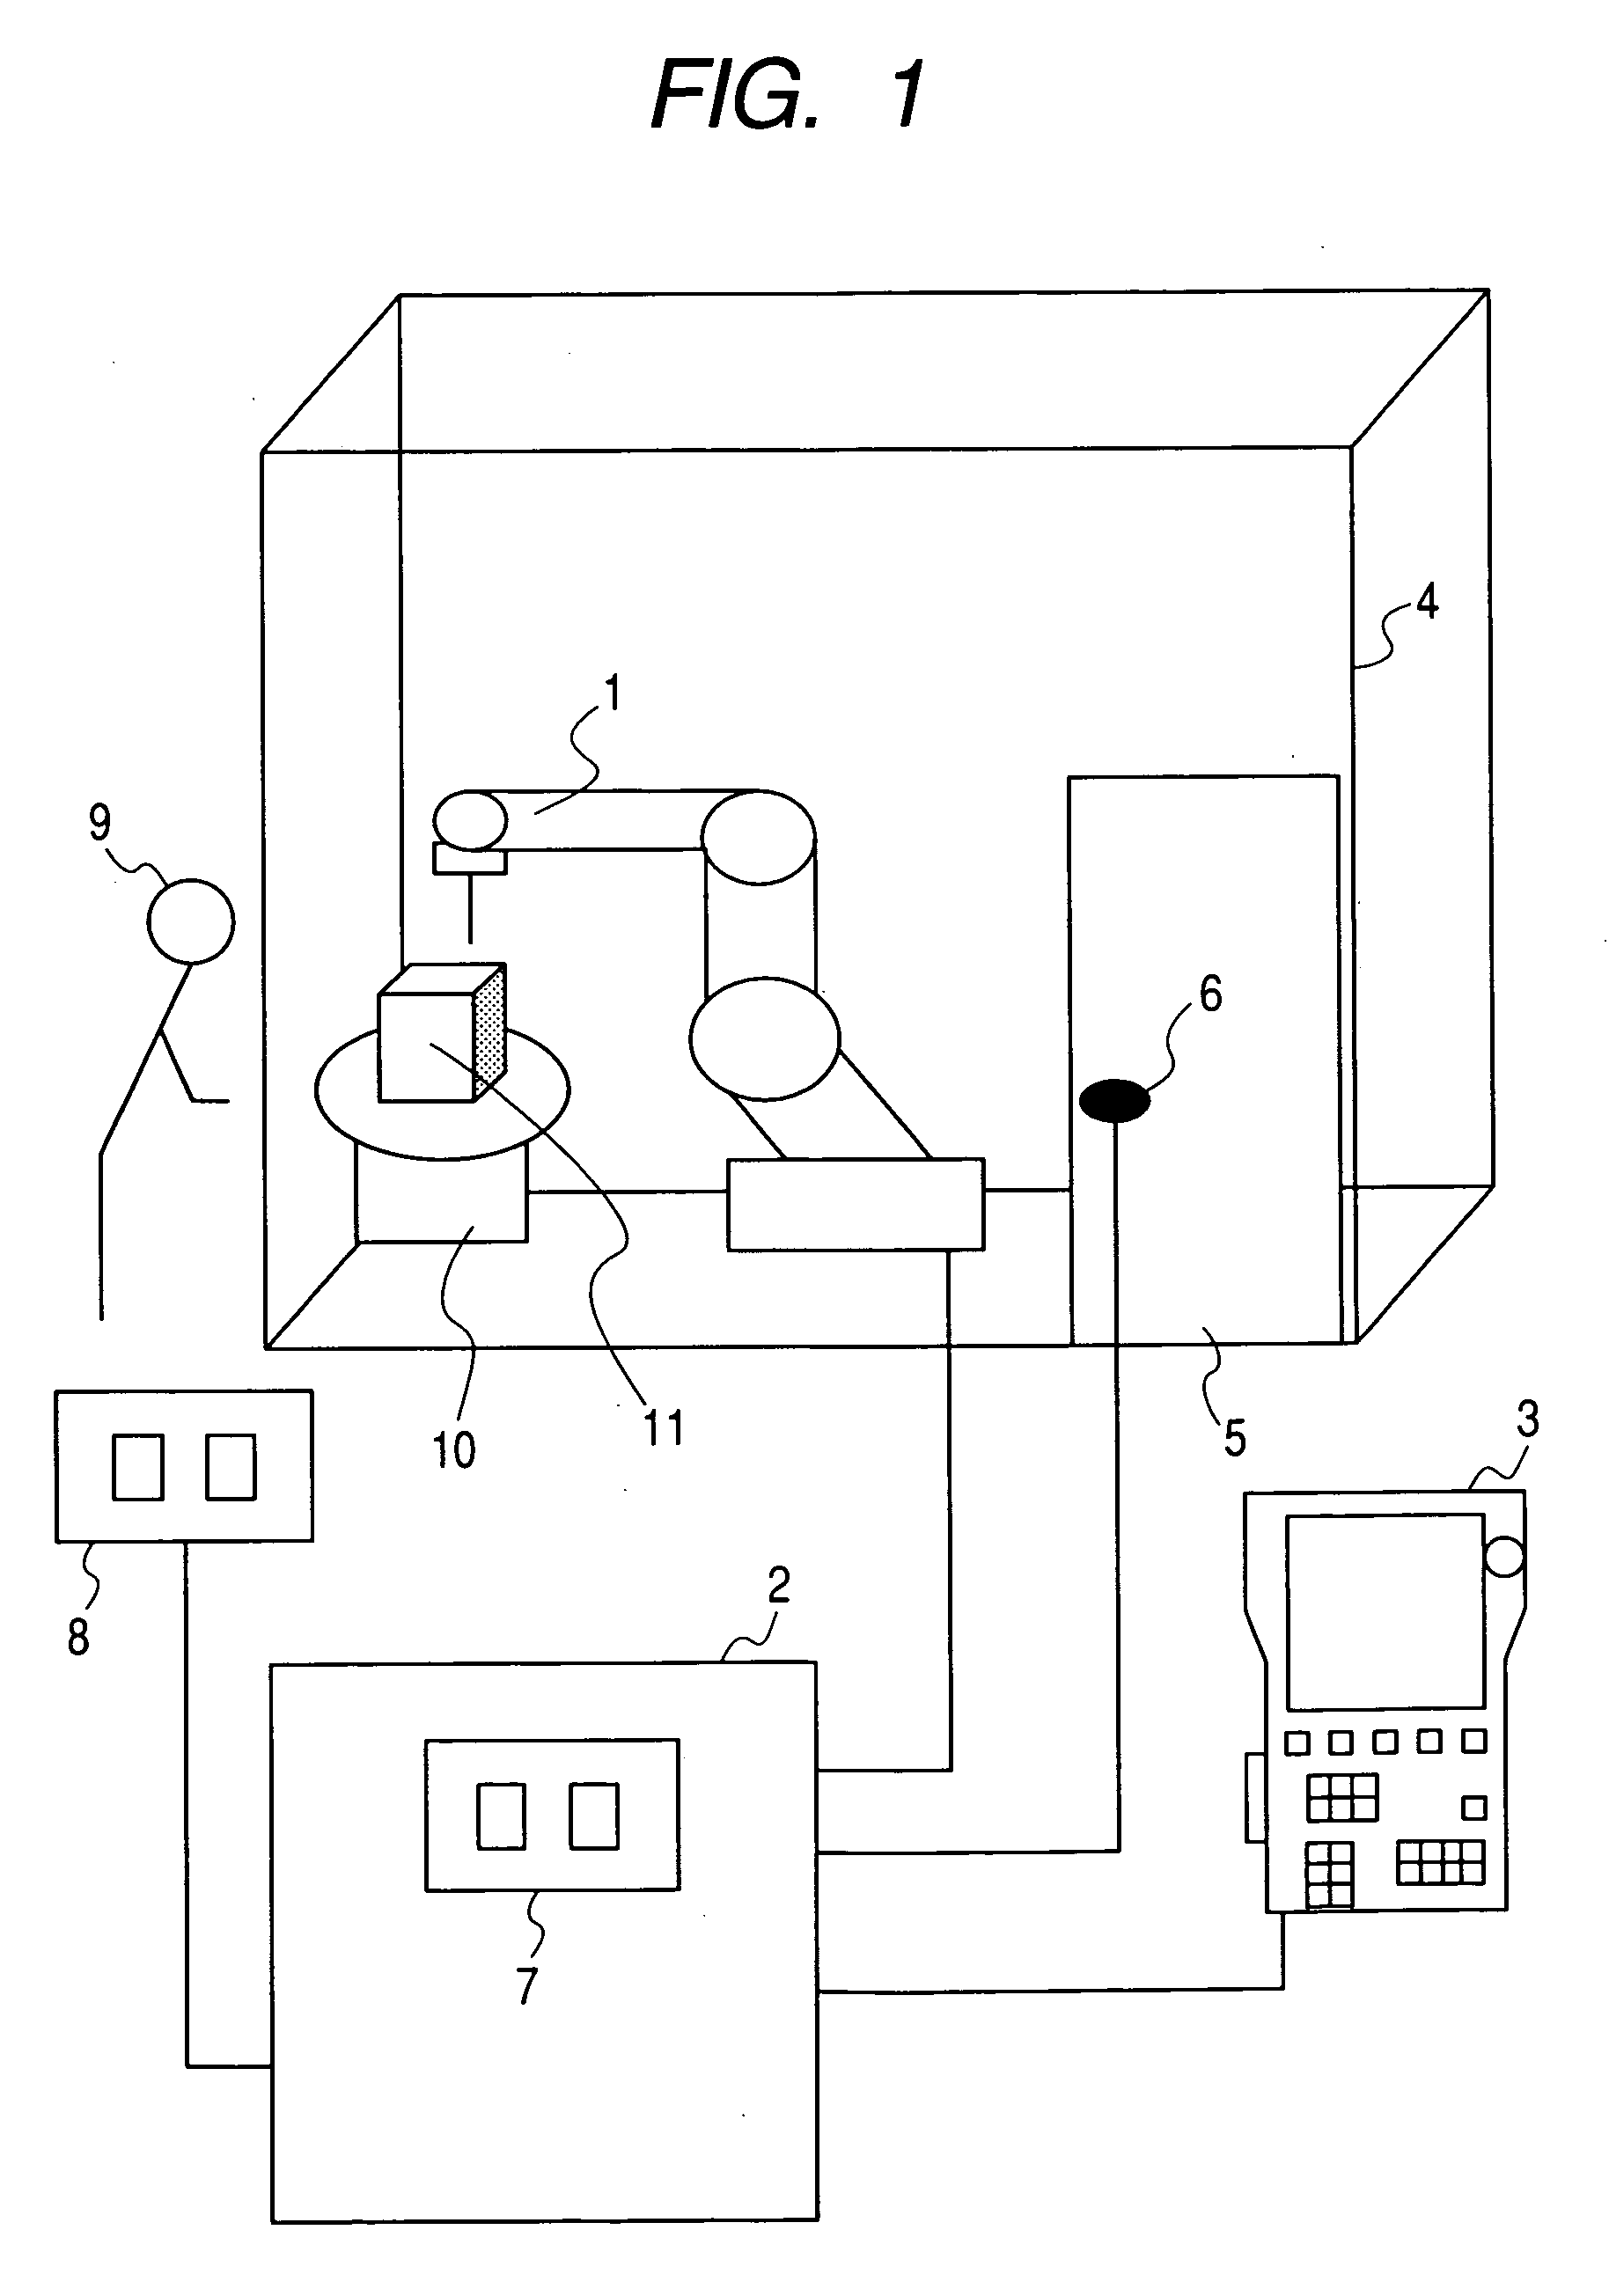 Control device for automatic machine